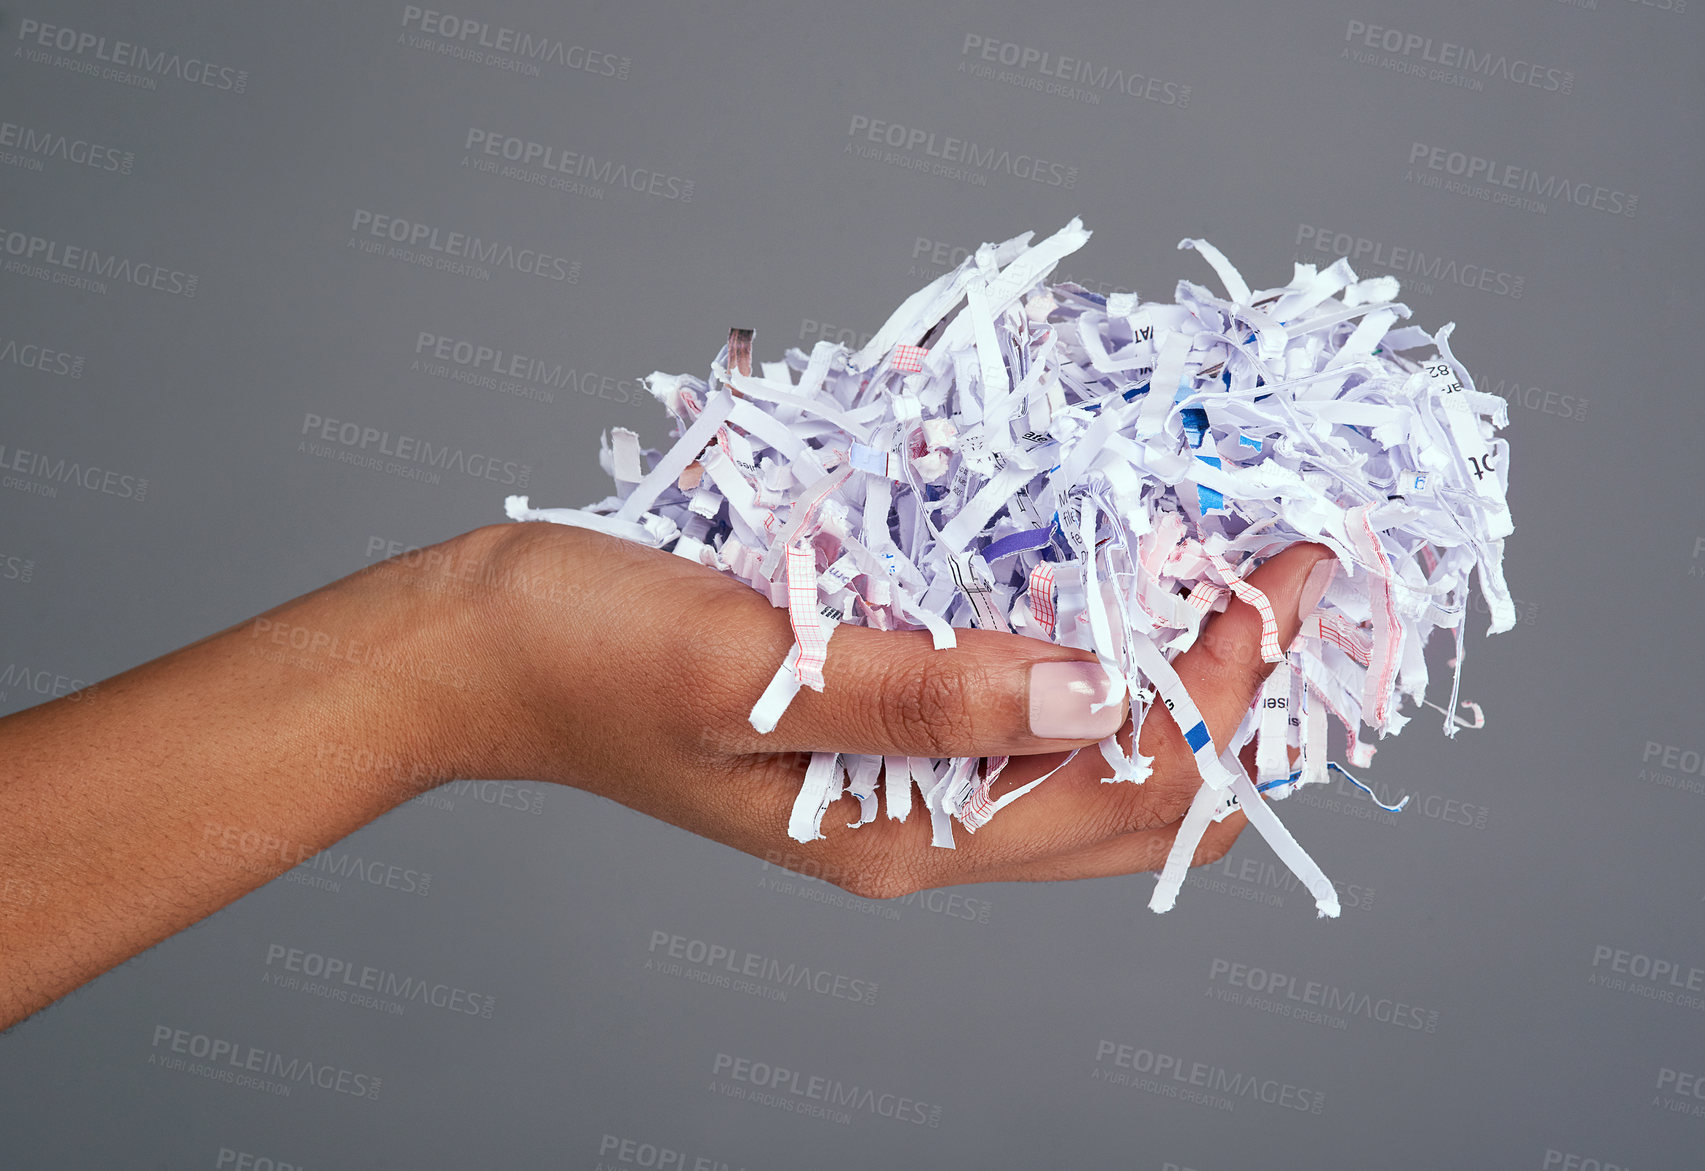 Buy stock photo Studio shot of a woman's hand holding a pile of shredded paper against a grey background